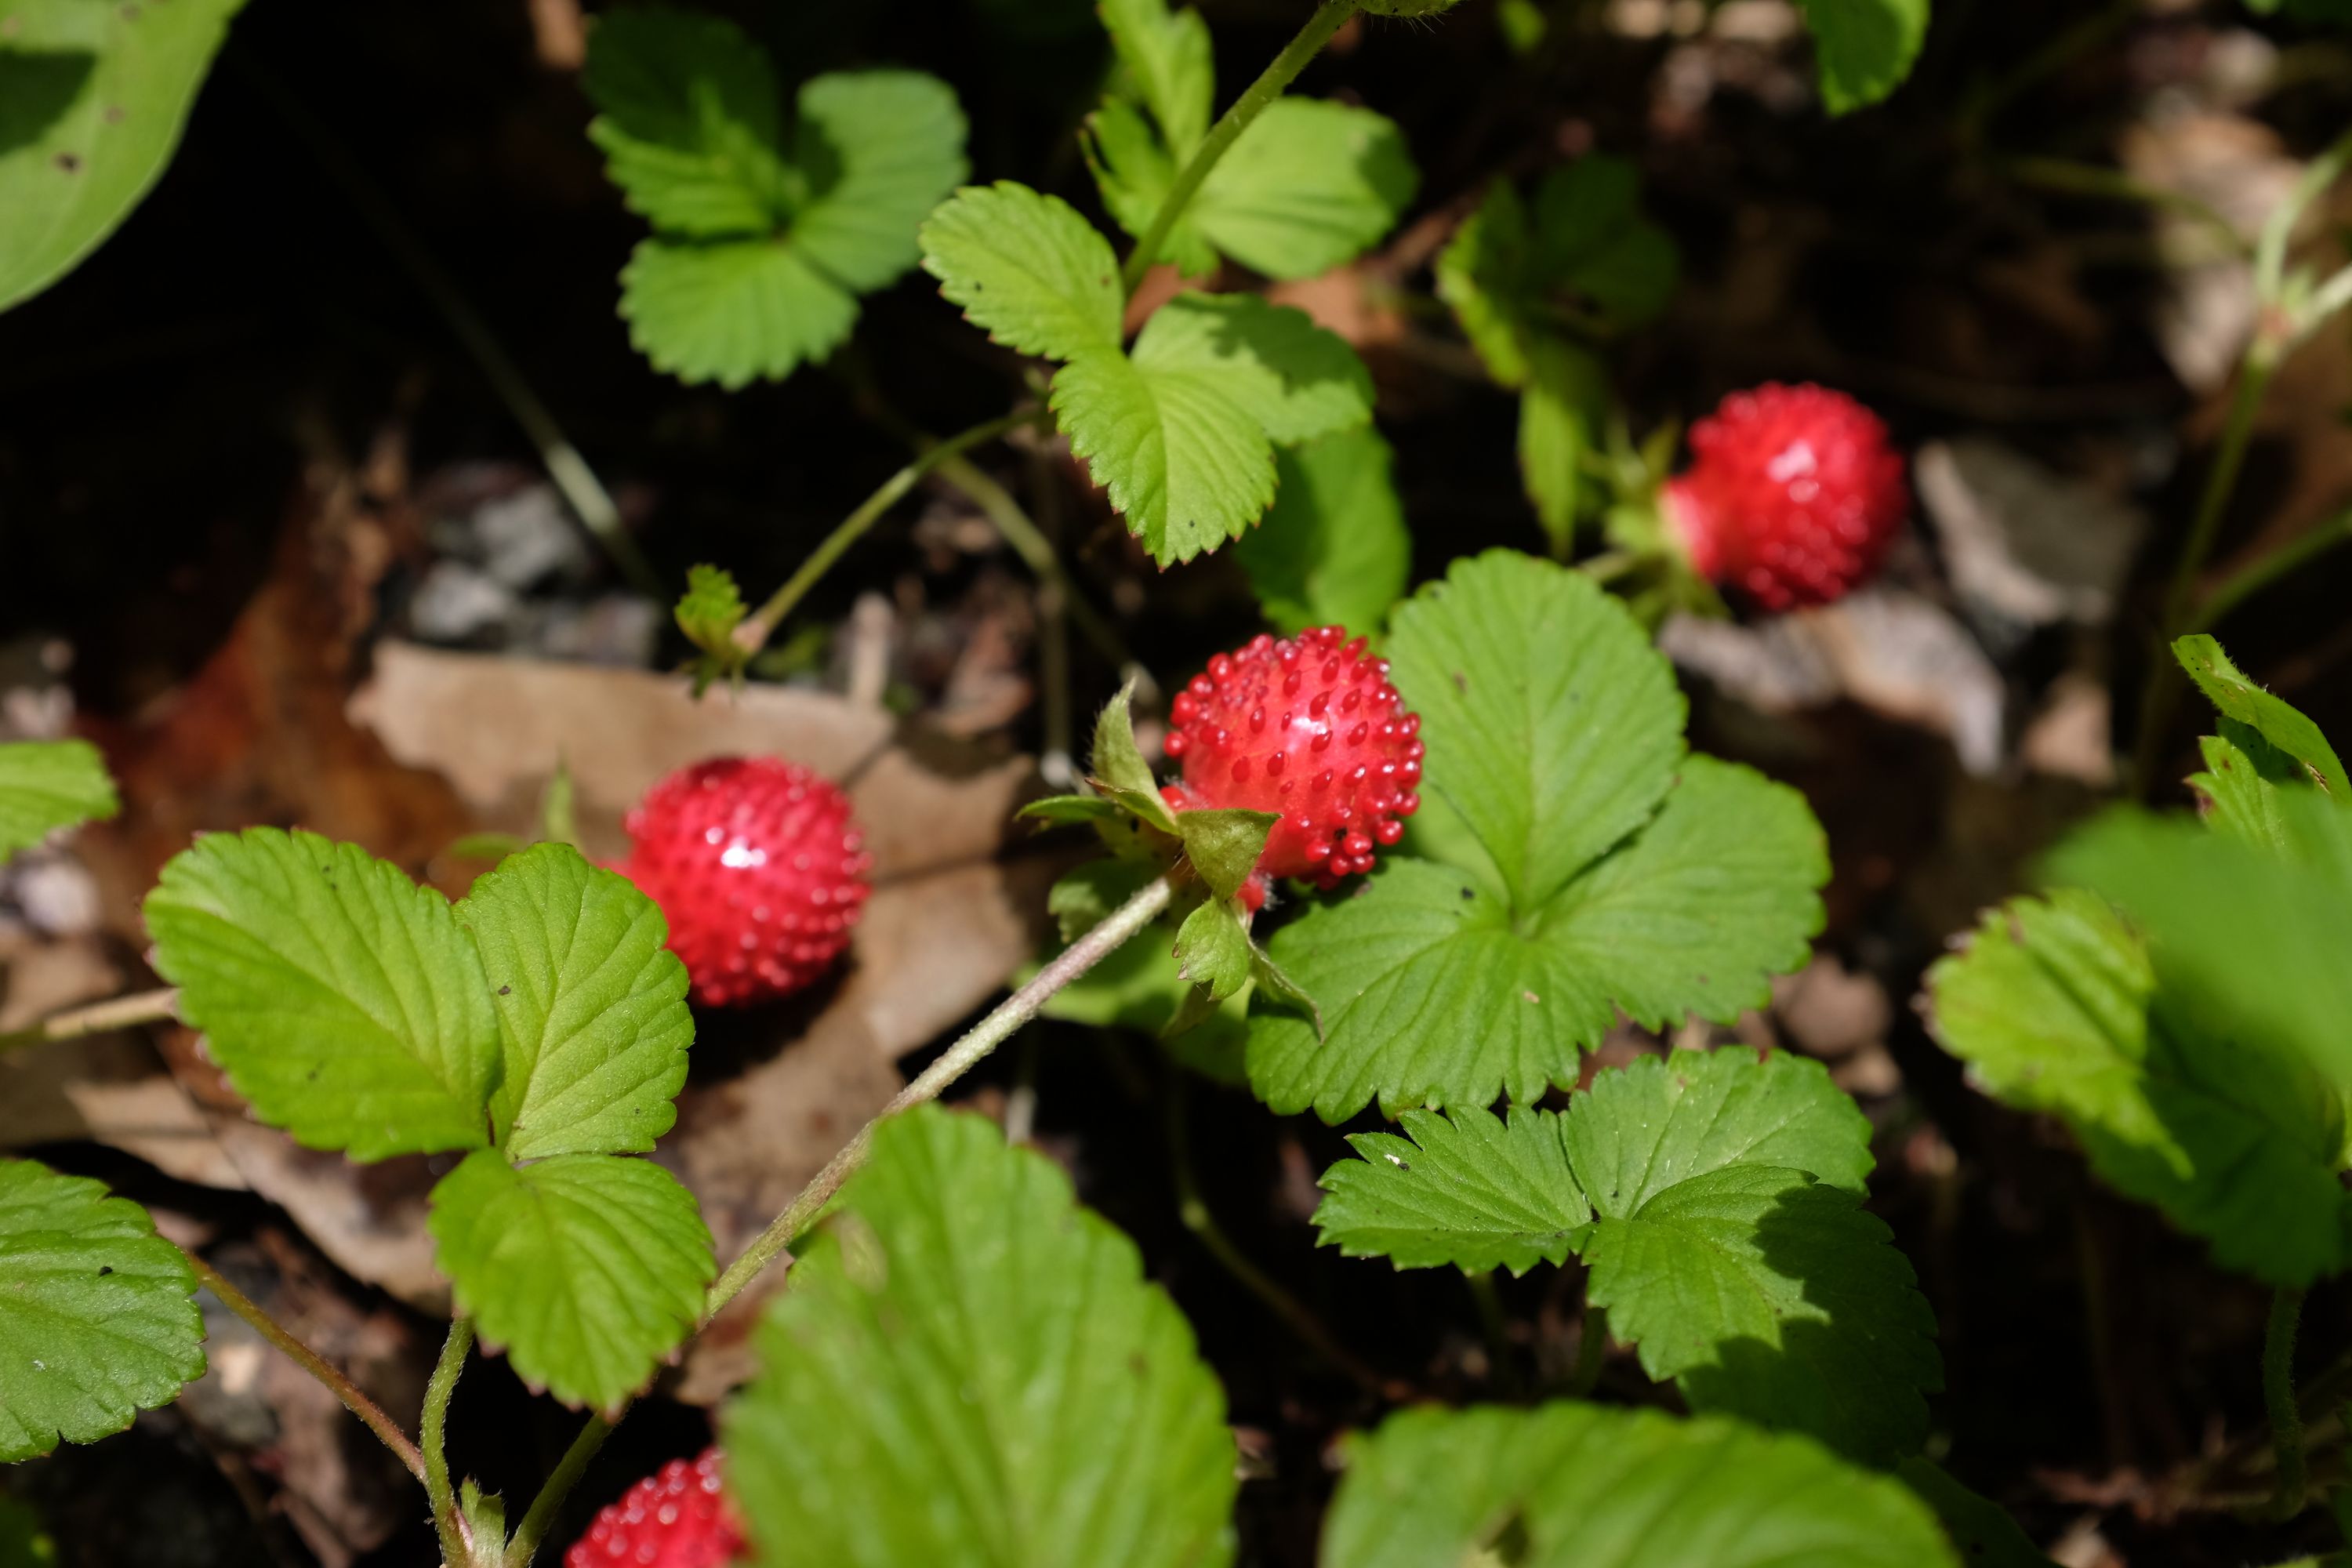 Ripe fruits of mock strawberry in the undergrowth.